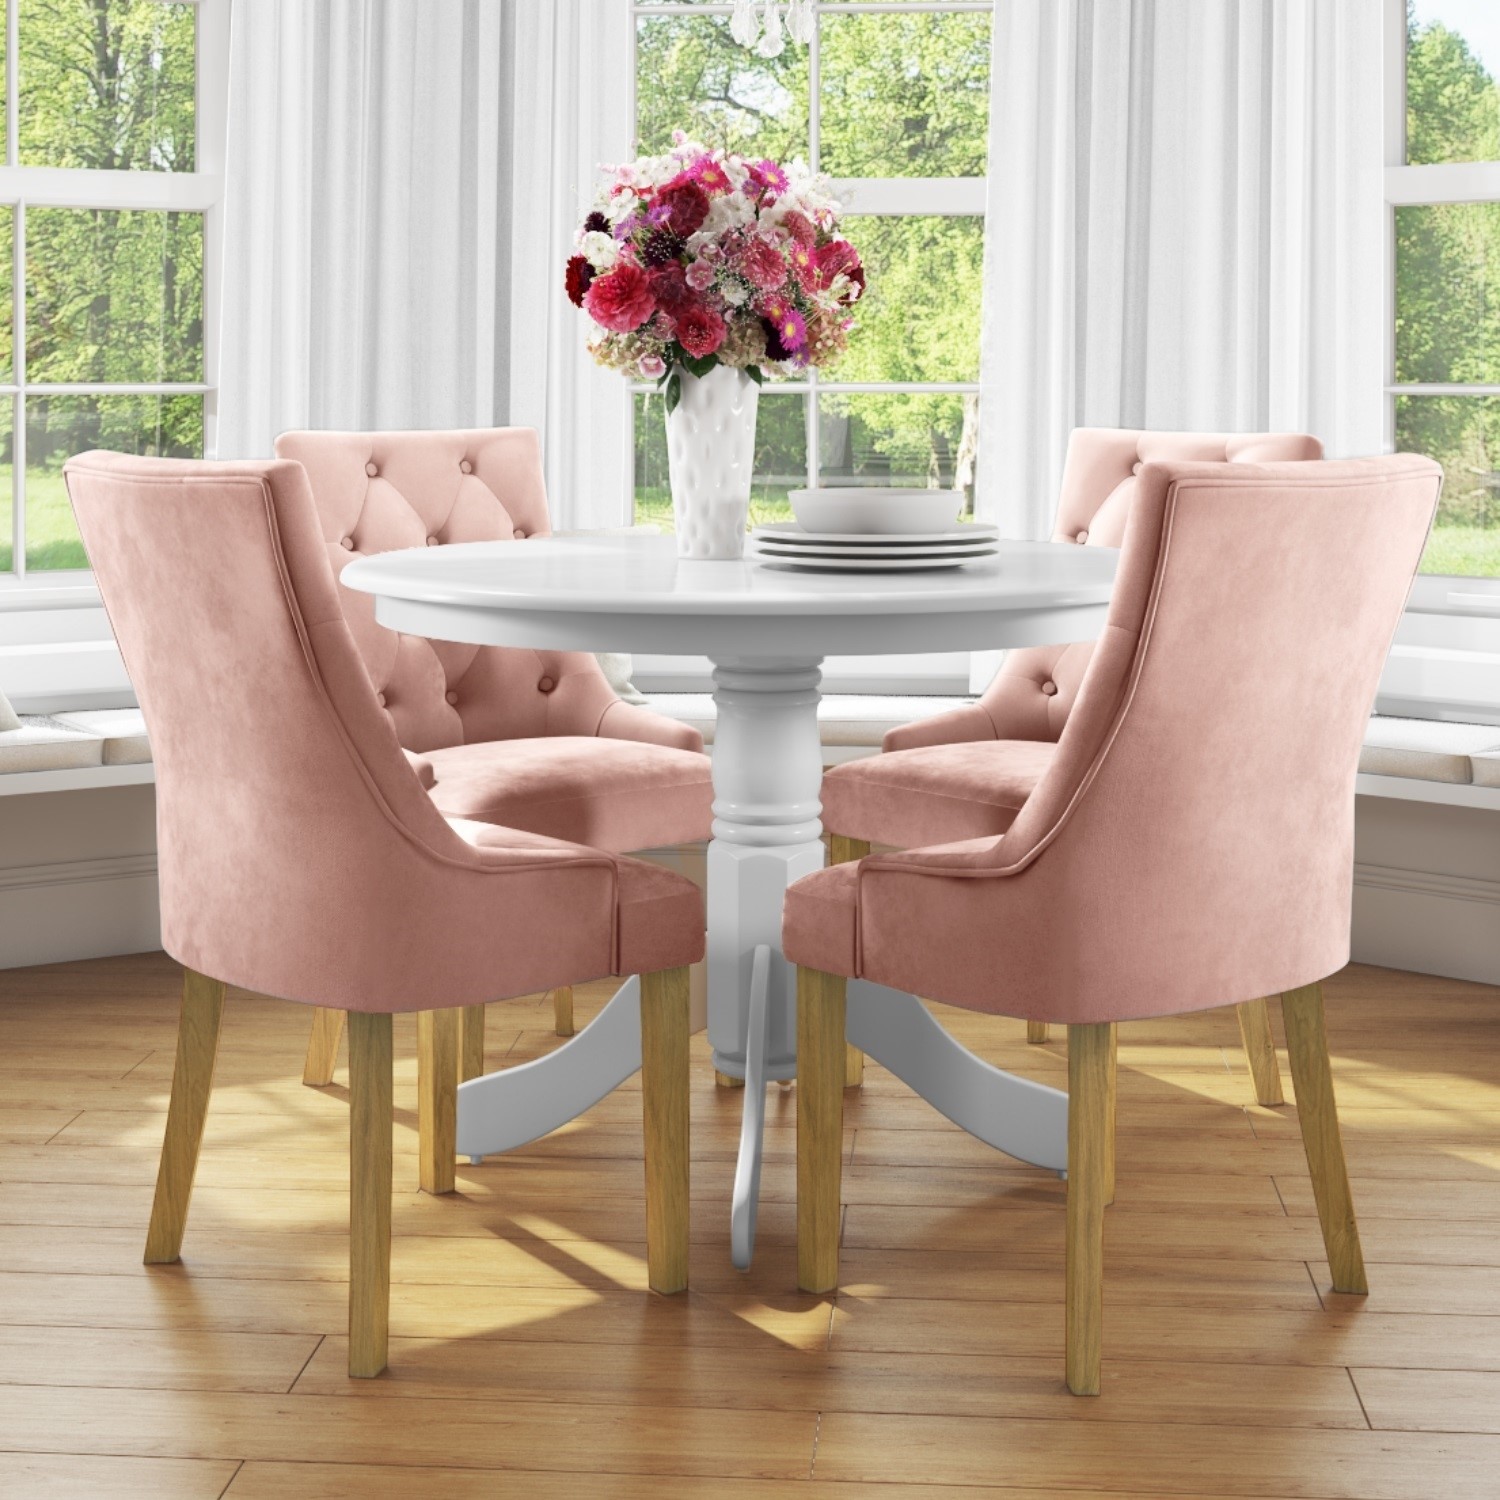 Small Round Dining Table in White with 4 Velvet Chairs in Pink BUN ...